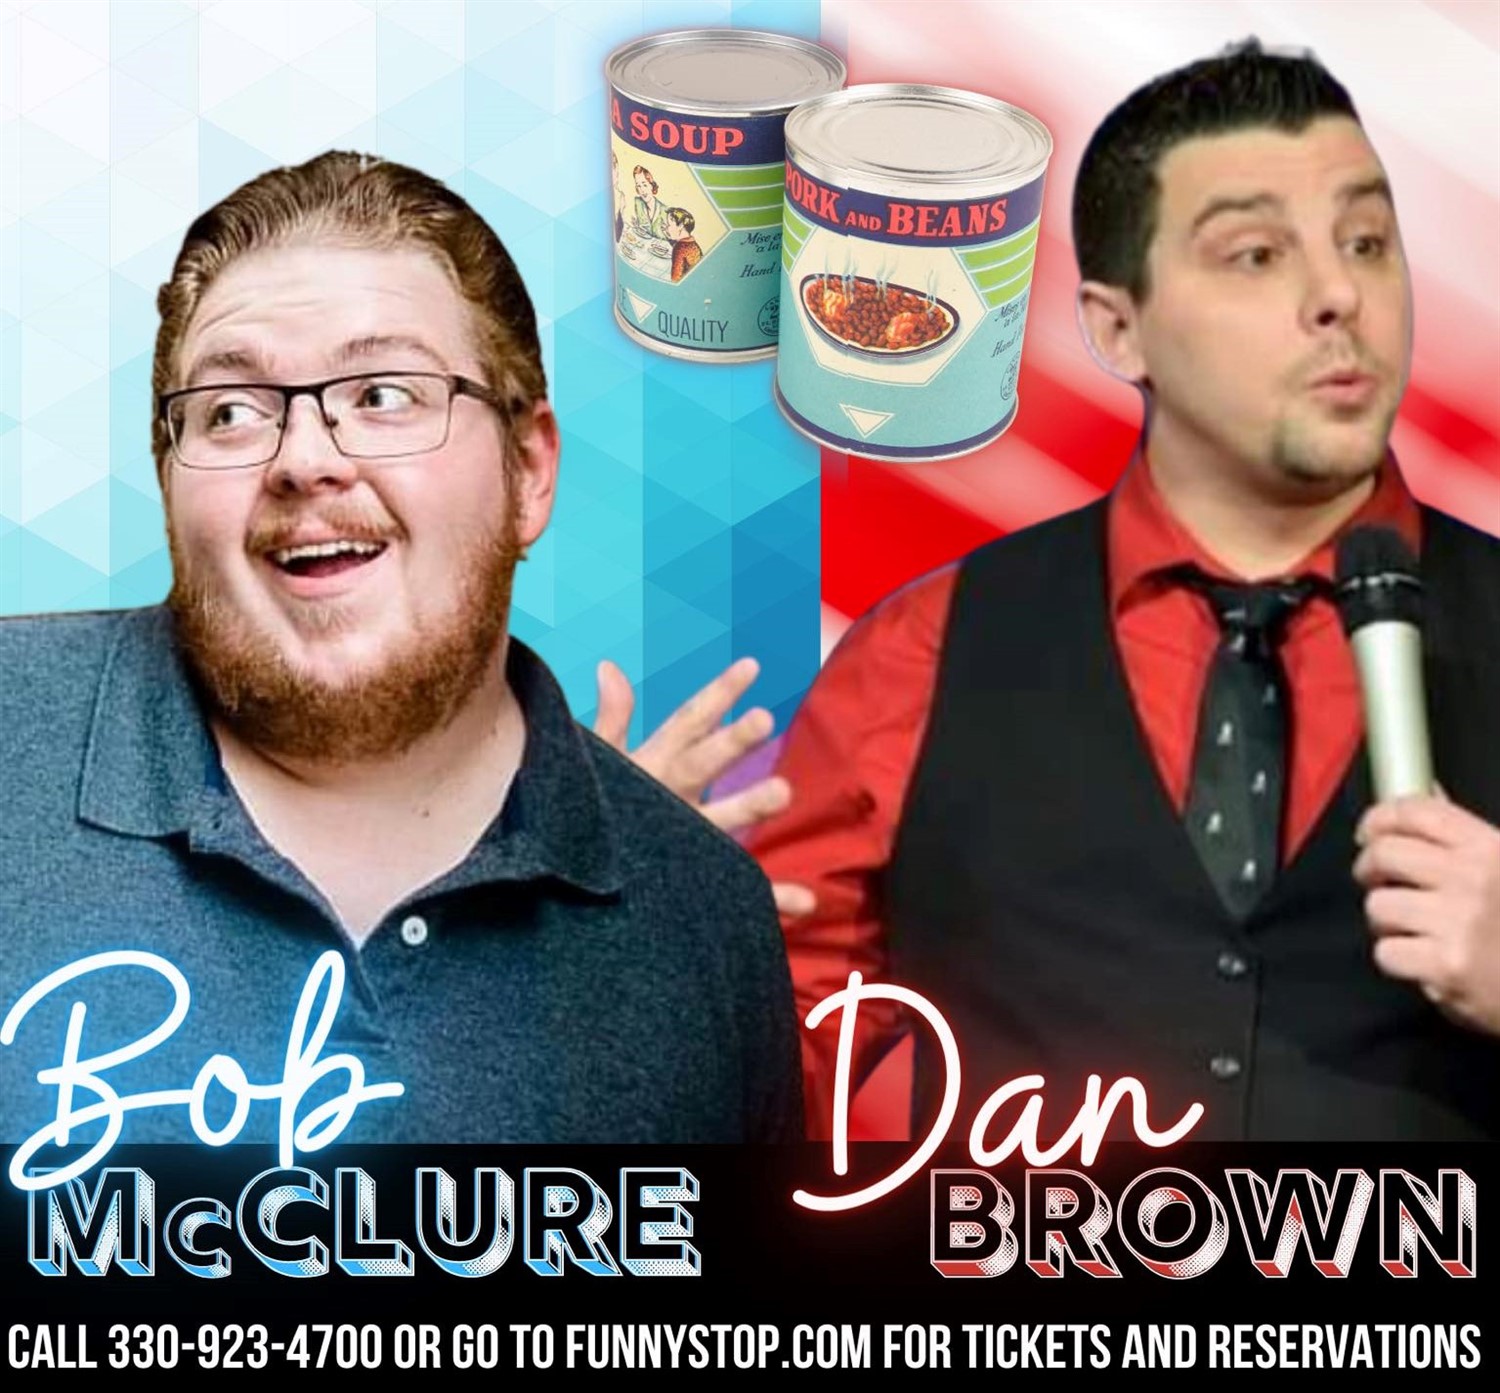 Bob McClure and Dan Brown 9:20pm show Funny Stop Comedy Club on dic. 17, 21:20@Funny Stop Comedy Club - Buy tickets and Get information on Funny Stop funnystop.online